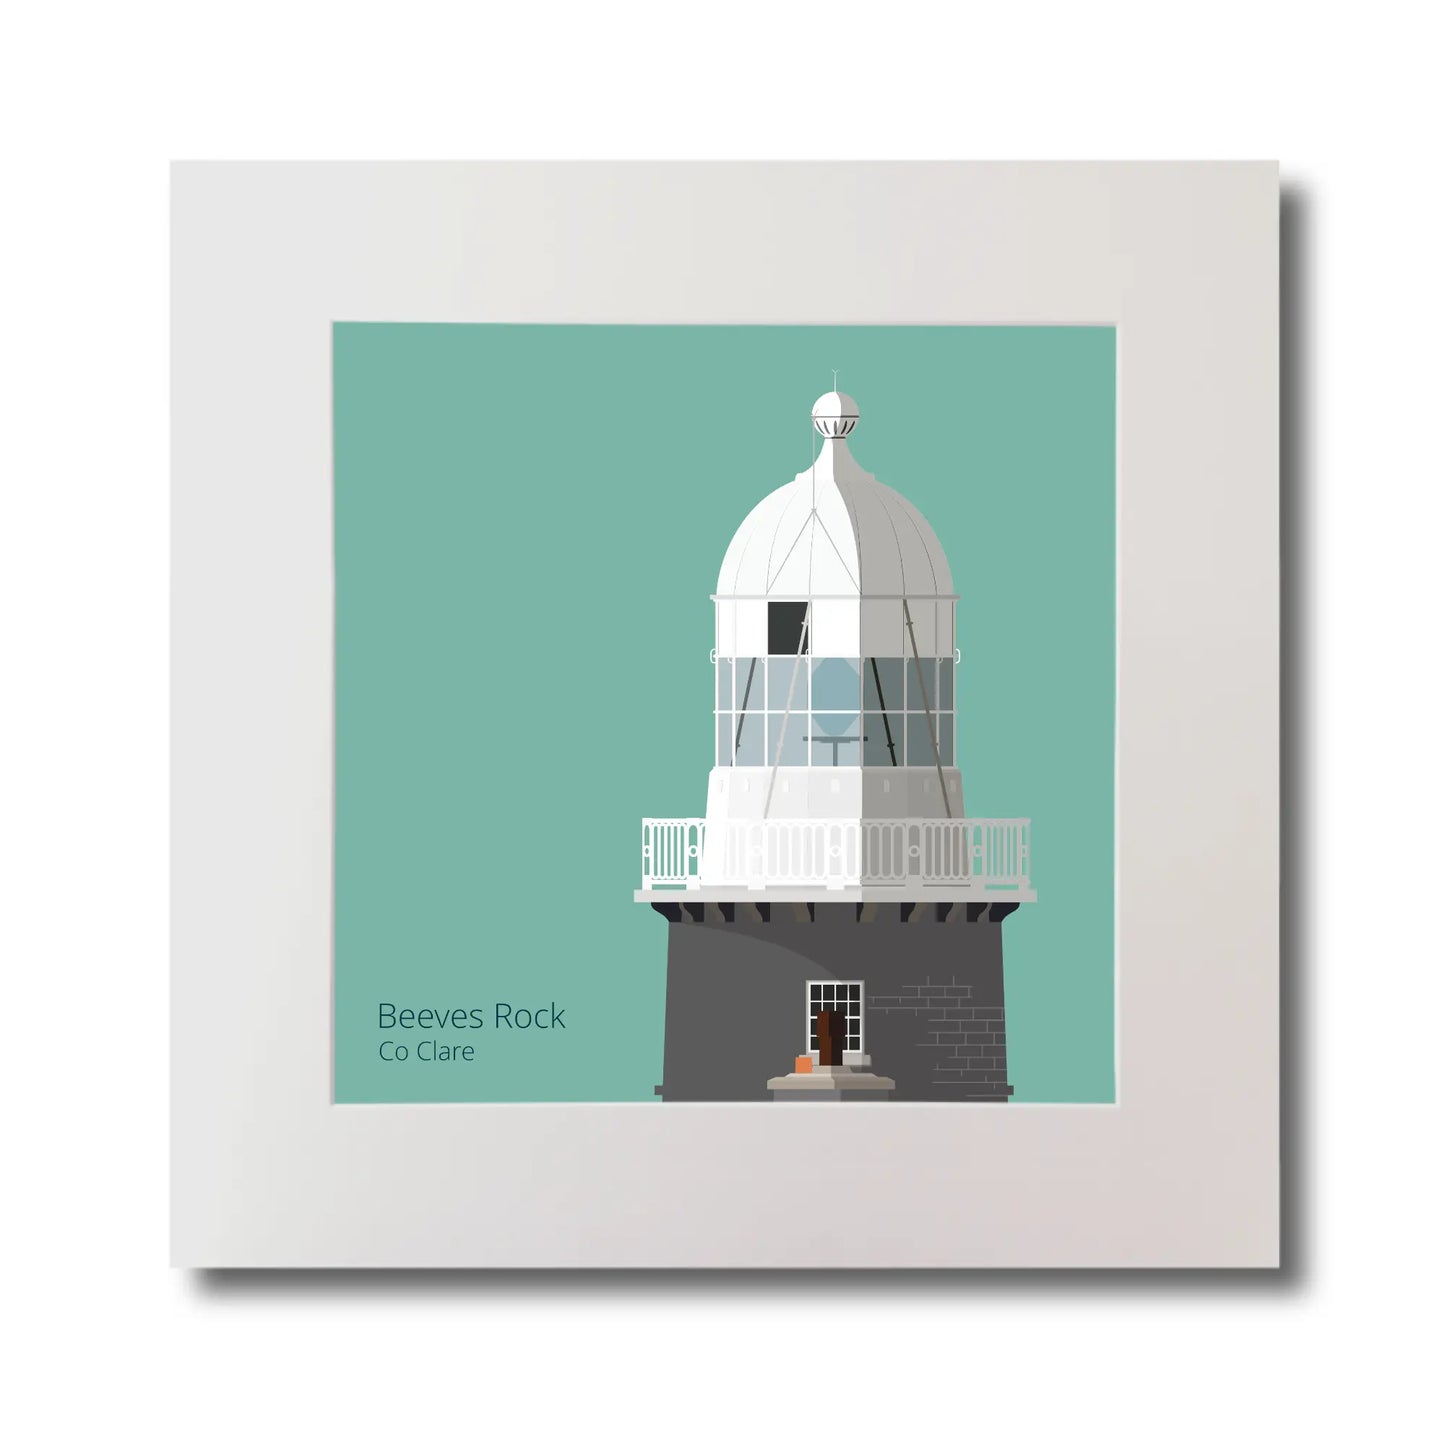 Illustration of Beeves Rock lighthouse on an ocean green background, mounted and measuring 30x30cm.